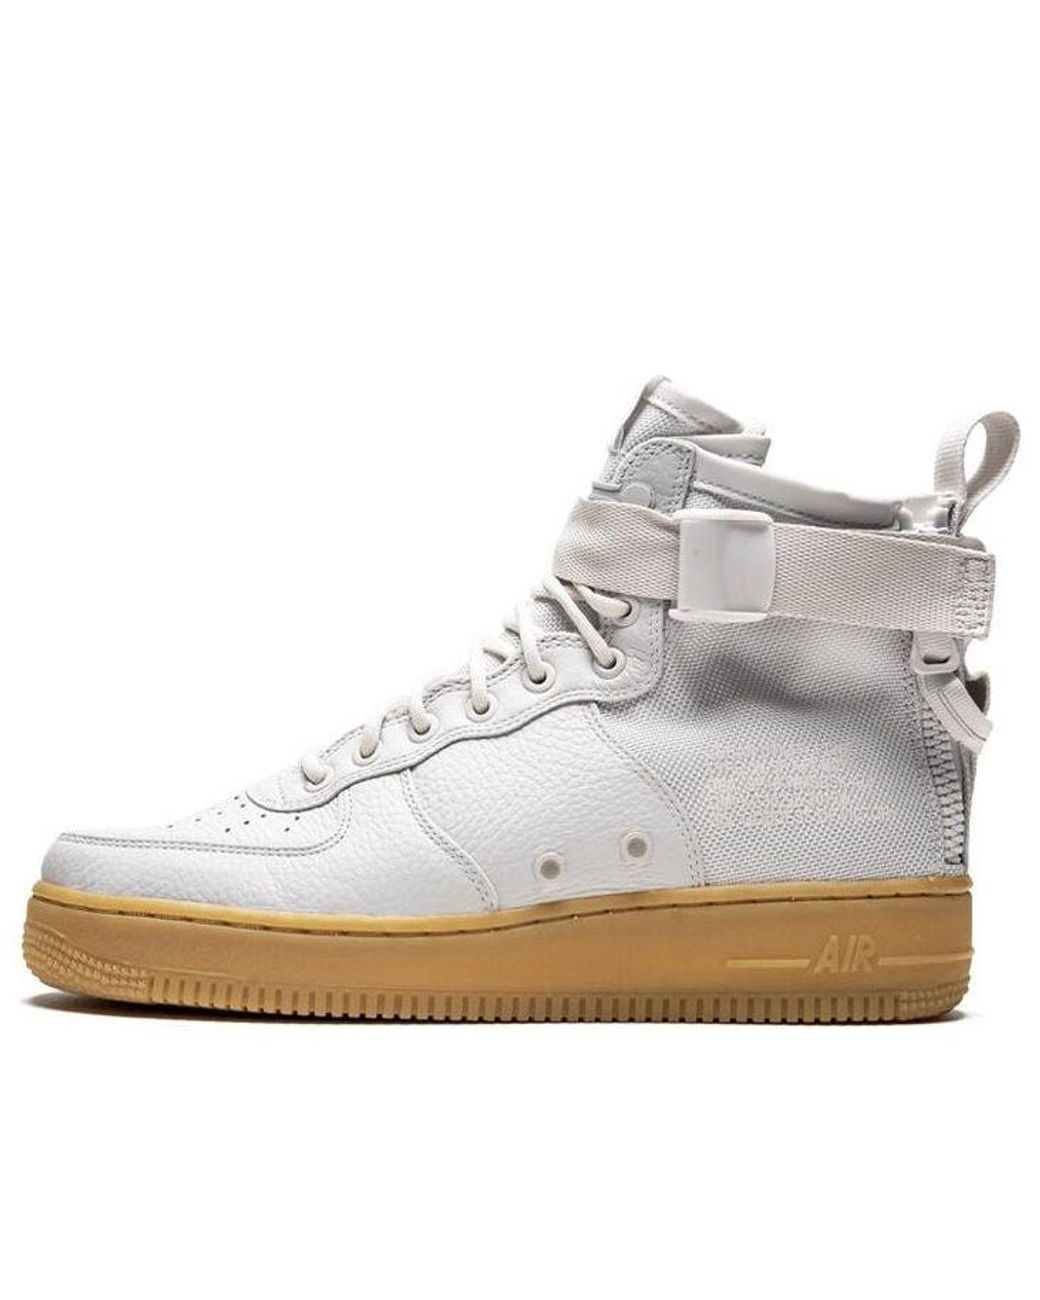 Nike Sf Air Force 1 Af1 Mid in White | Lyst